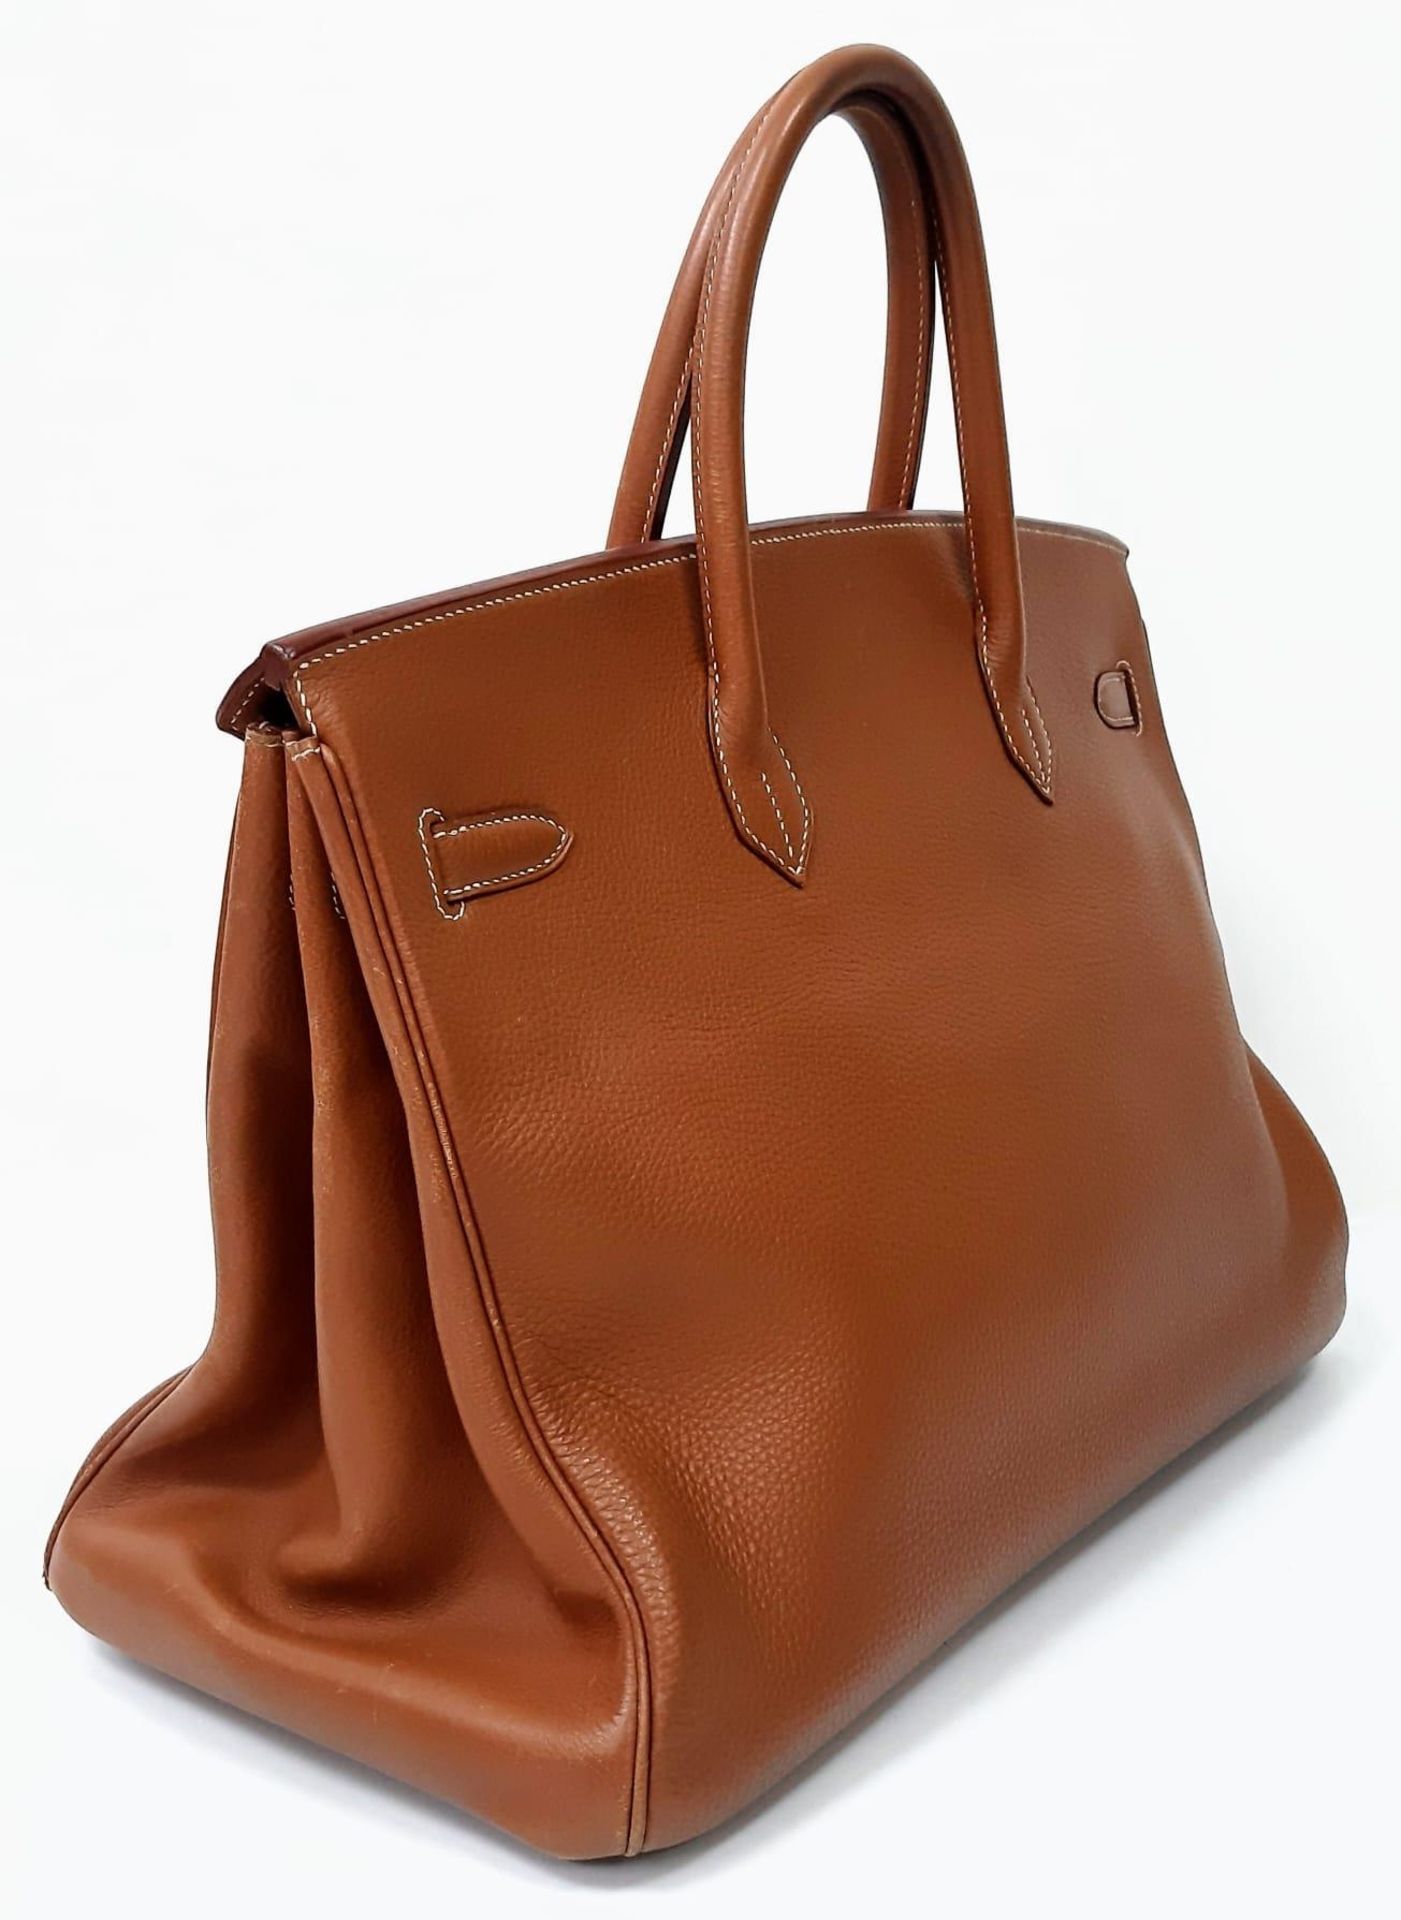 A Hermes Birkin Brown Leather Tote Bag. Handcrafted from the highest quality leather by skilled - Bild 6 aus 17